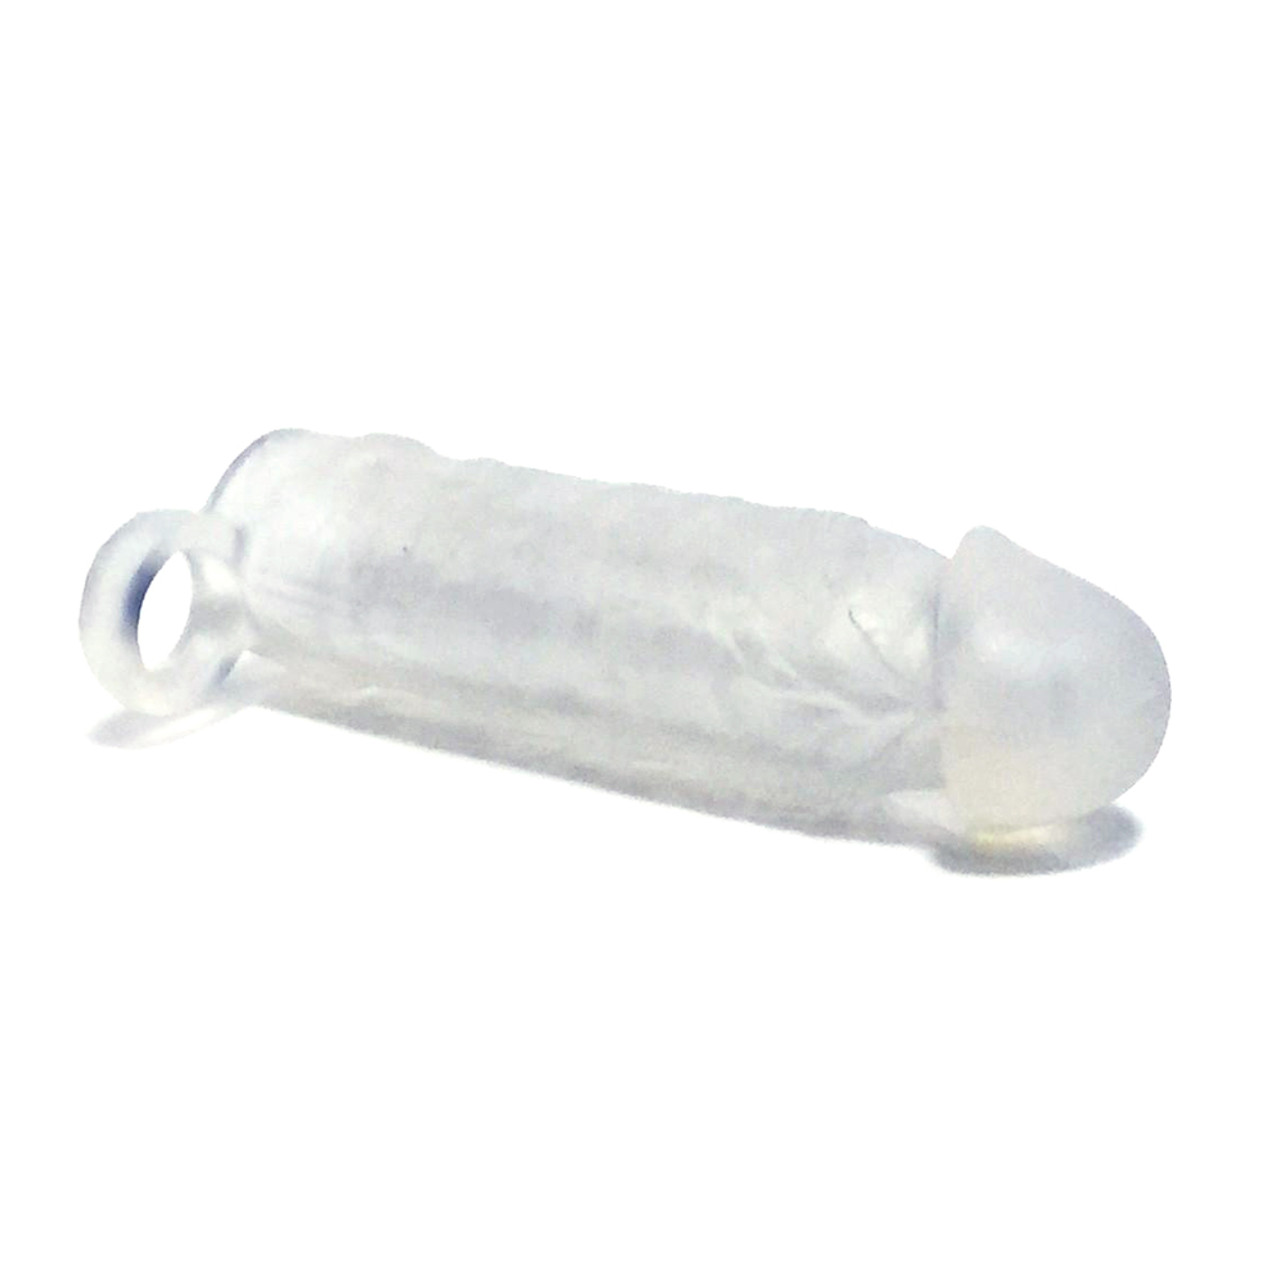 buy The Meaty 3X Stretch Realistic Silicone Penis Extender and Girth Enhancing Sleeve with Ball Strap in Clear ManSizer photo